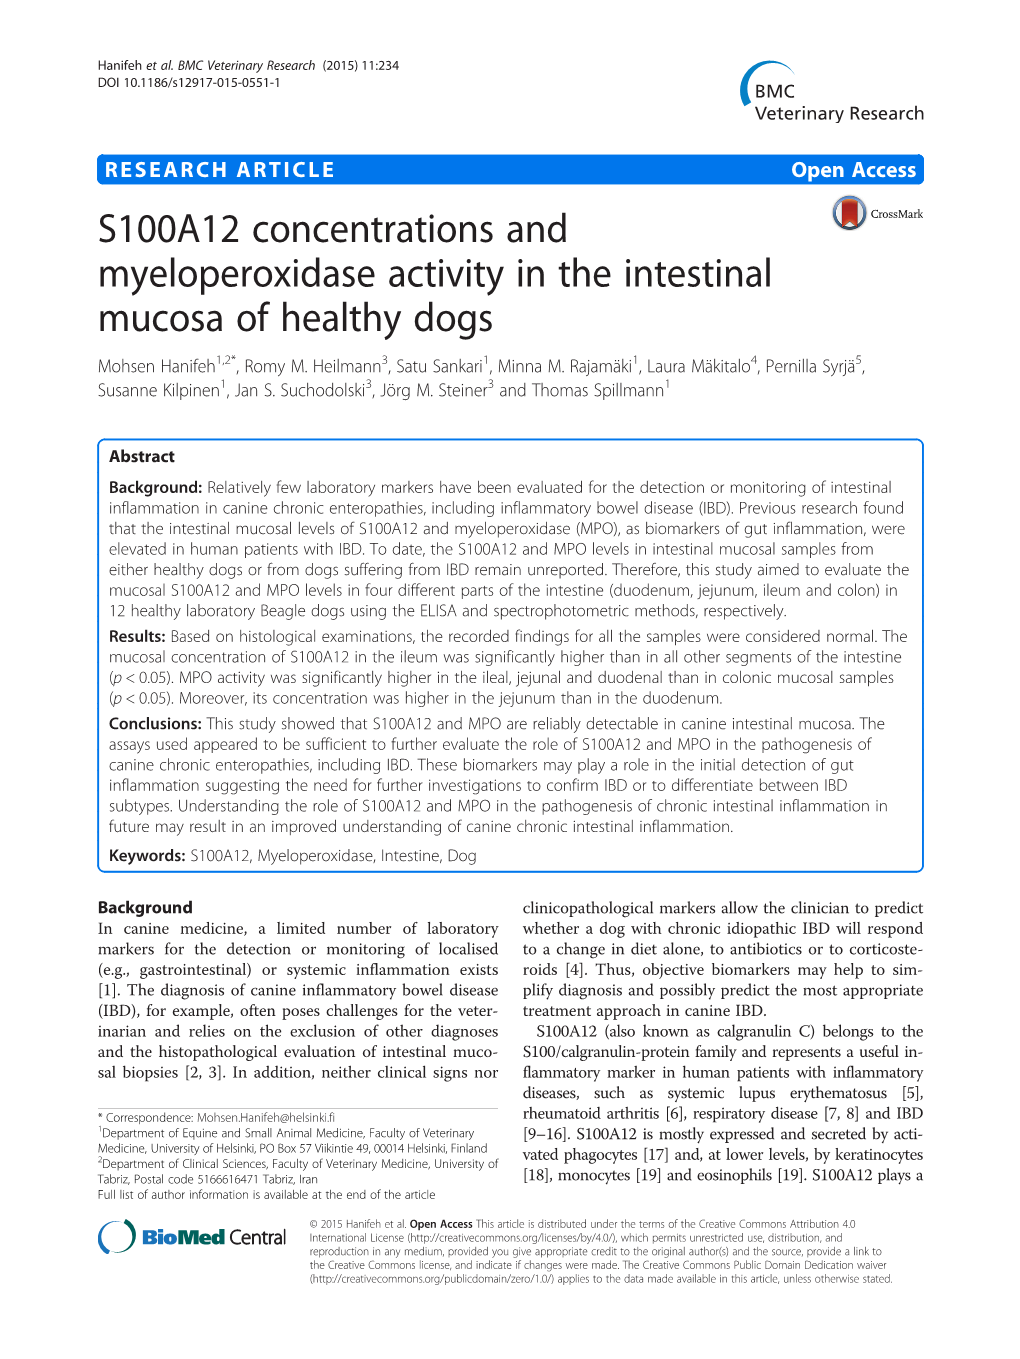 S100A12 Concentrations and Myeloperoxidase Activity in the Intestinal Mucosa of Healthy Dogs Mohsen Hanifeh1,2*, Romy M